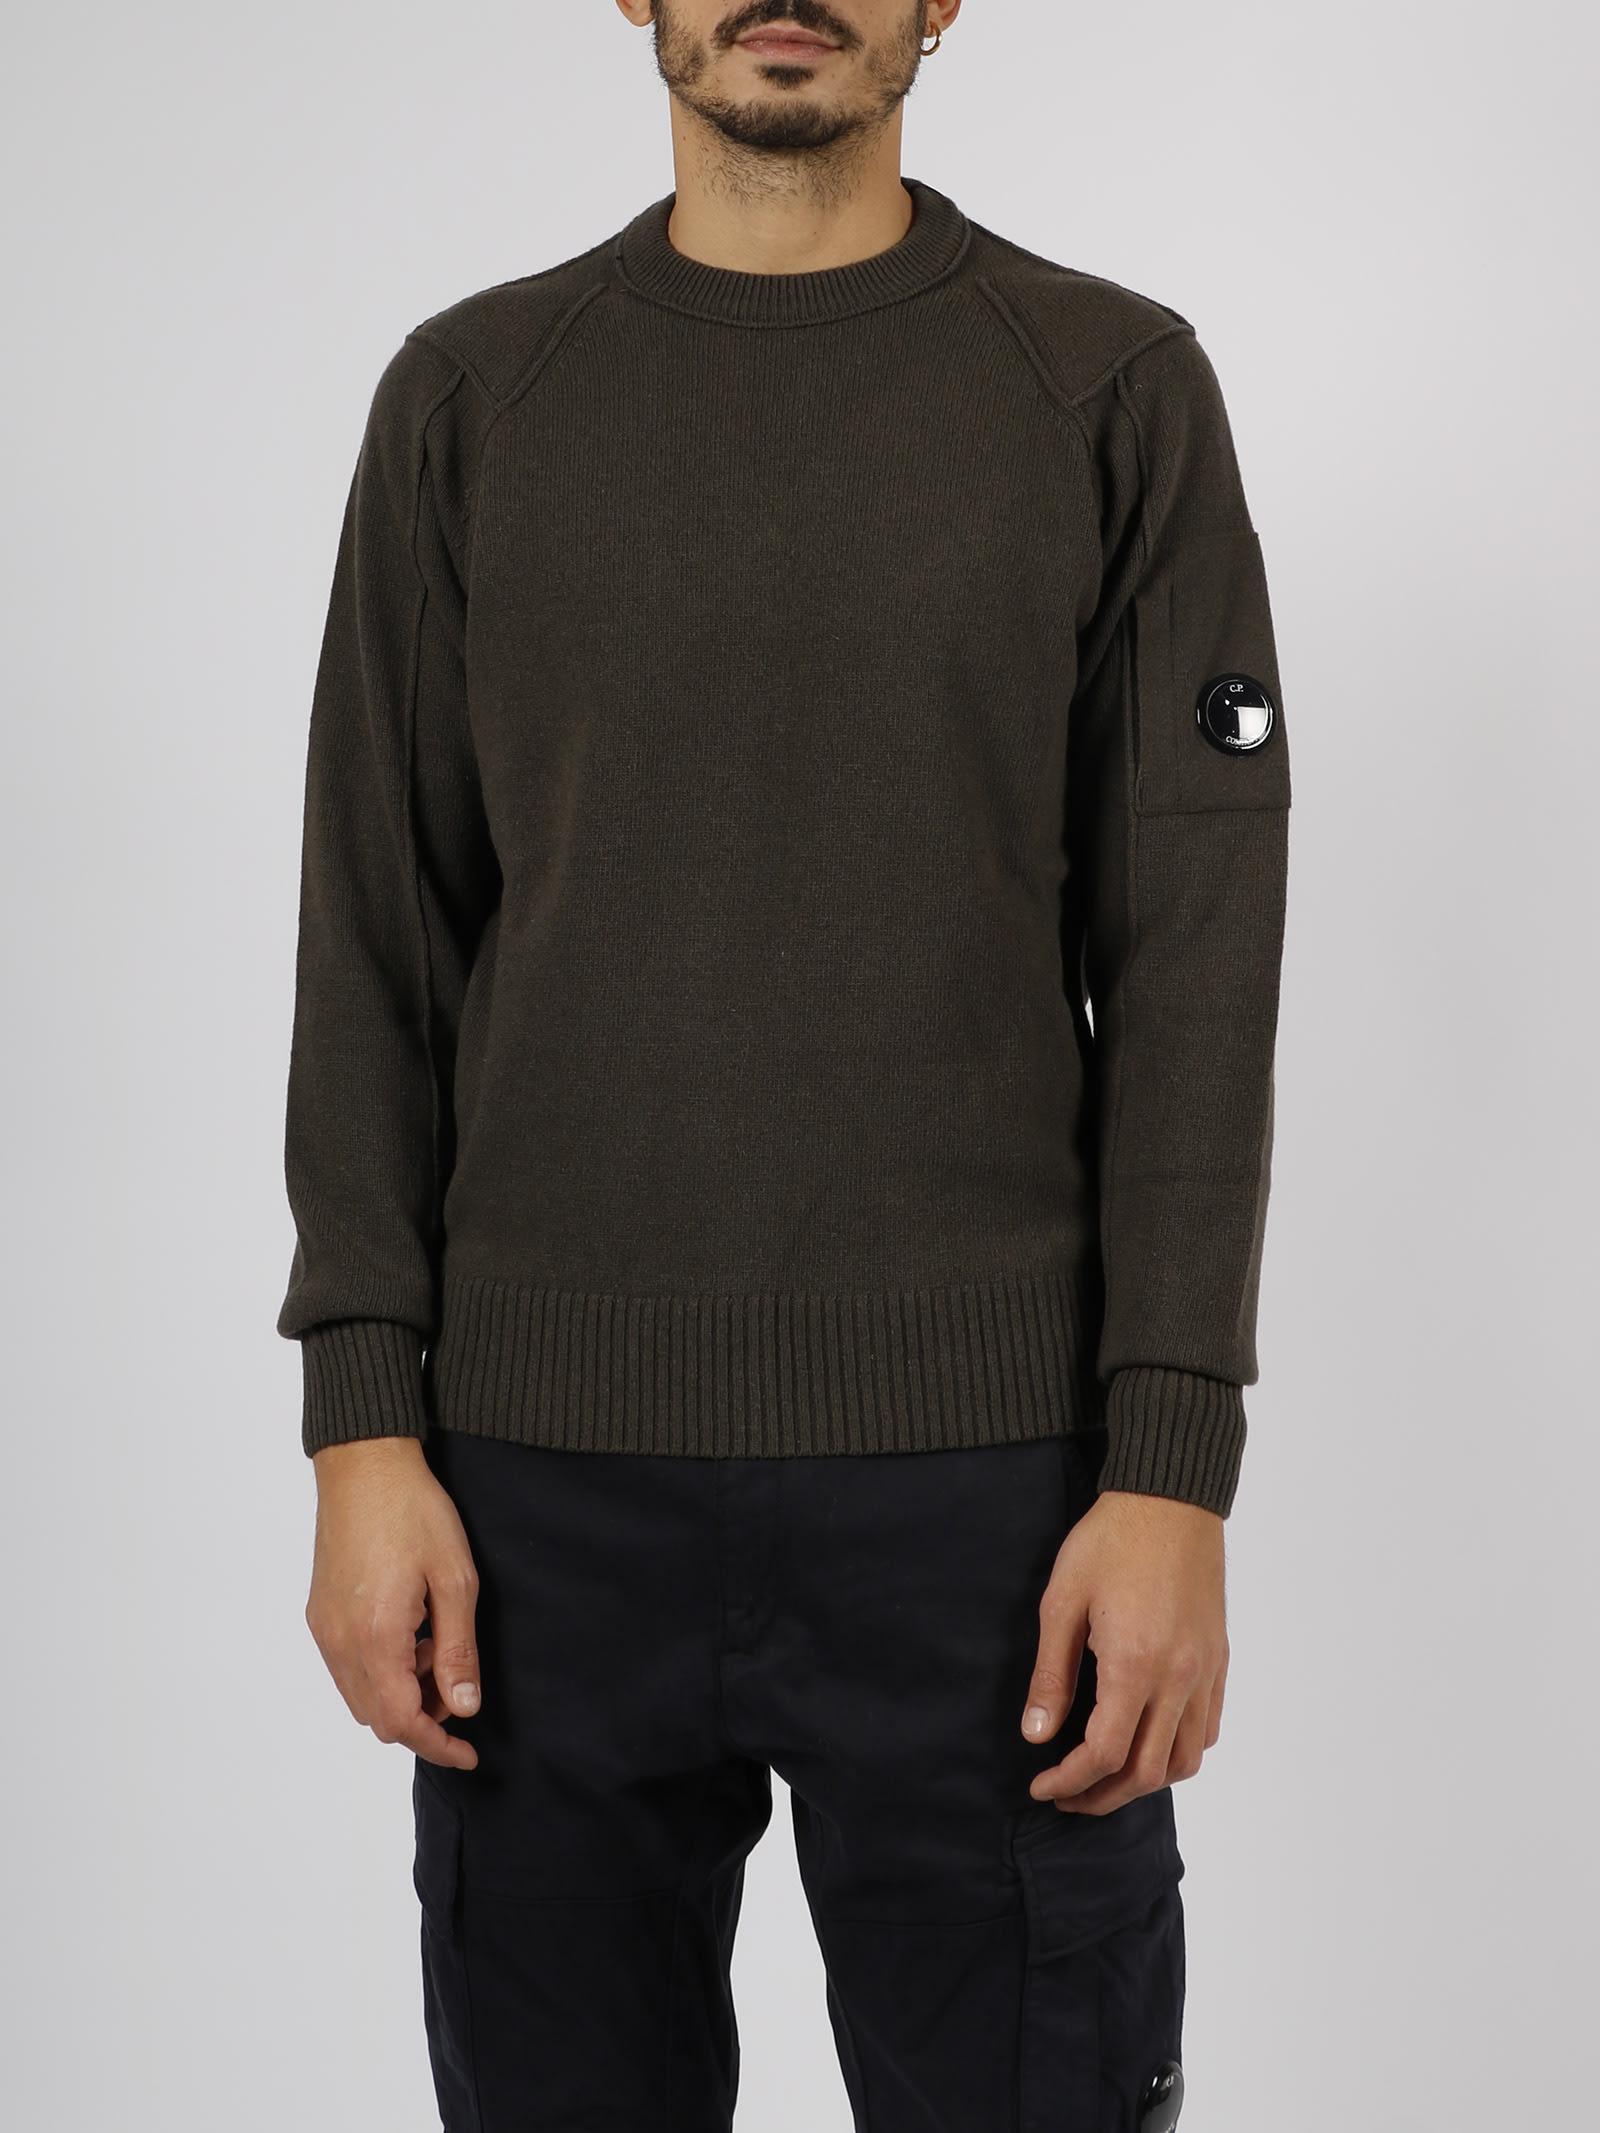 C.P. Company Lambswool Jumper in Green for Men | Lyst